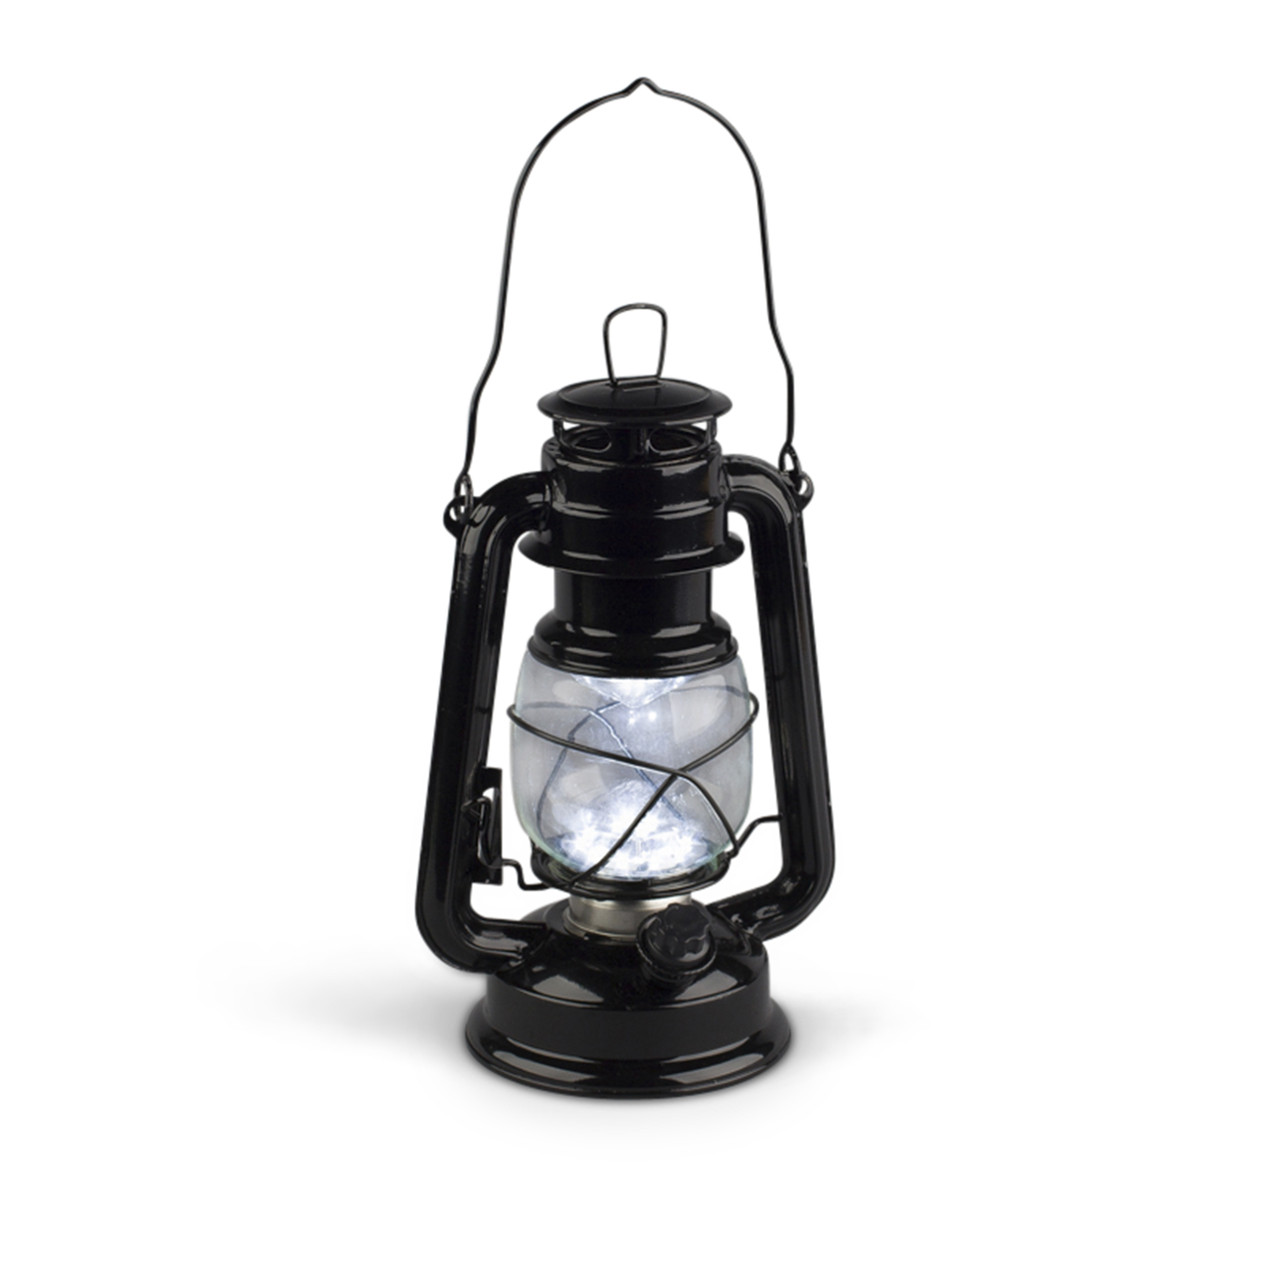 A wide variety of black mini lanterns options are available to you, such as use, material, and occasion. Small Black Indoor/Outdoor Hurricane Lantern with Dimmer ...